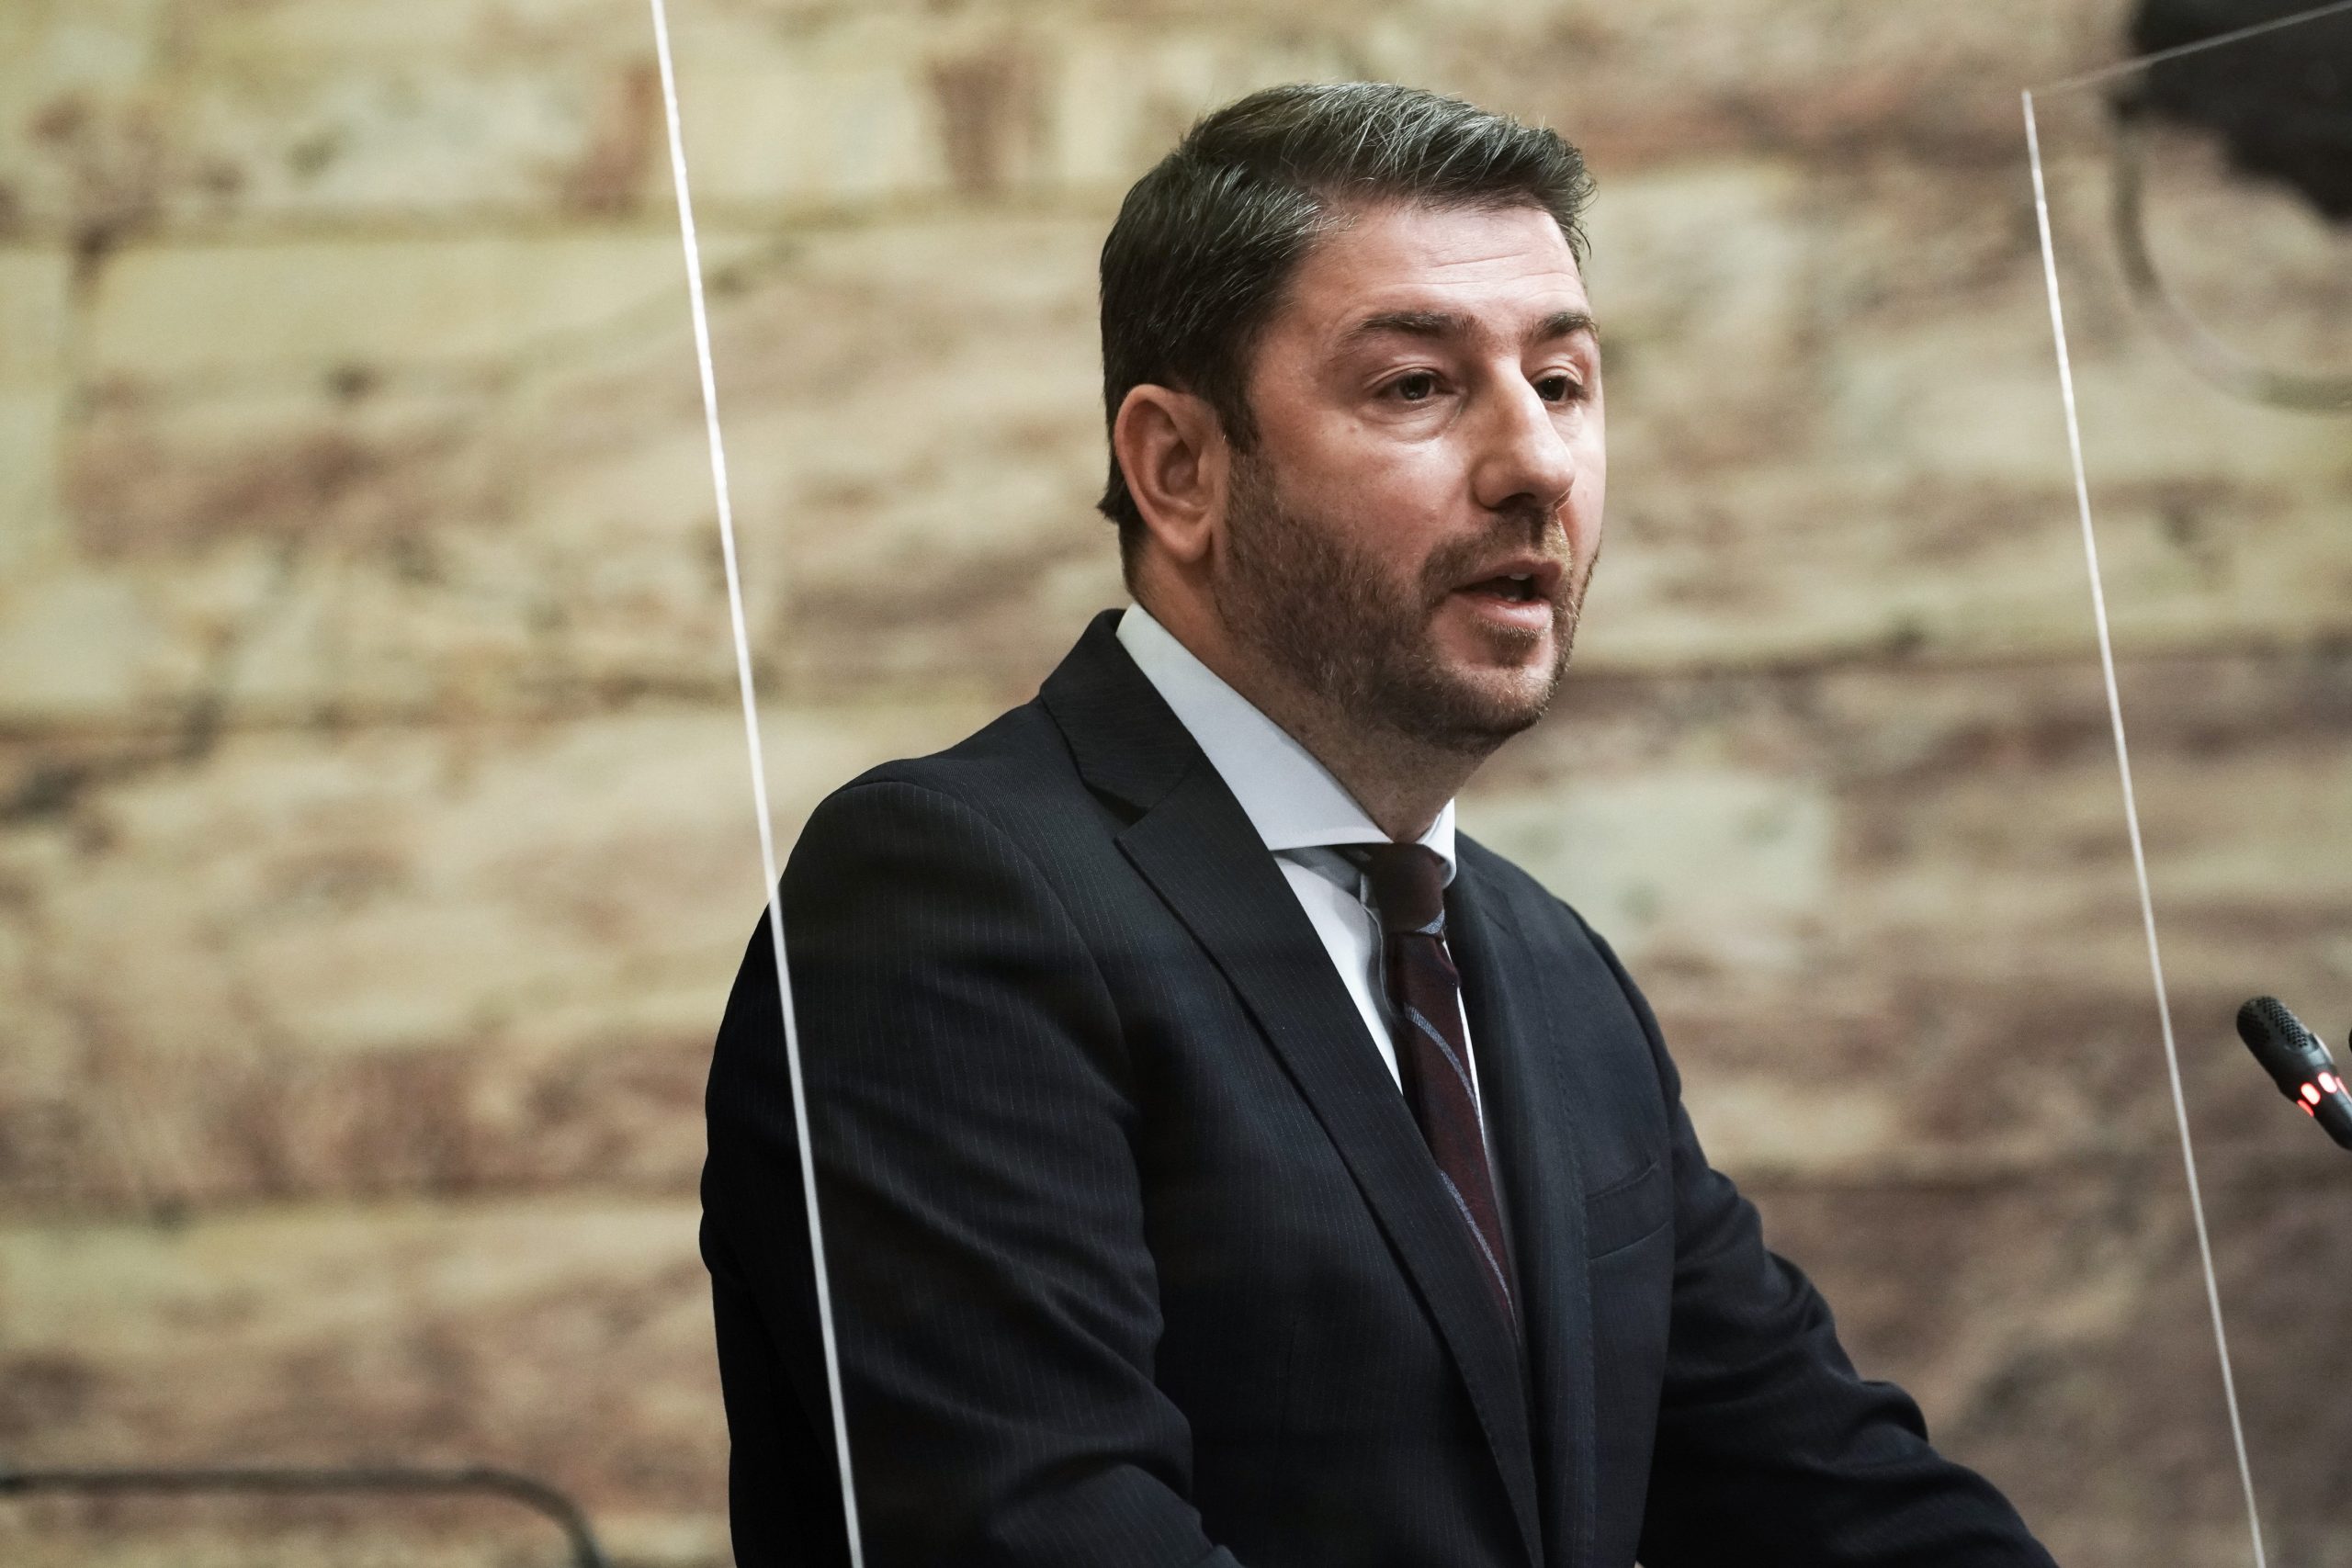 PASOK leader Androulakis demands PM disclose reason why intelligence agency wiretapped his mobile phone